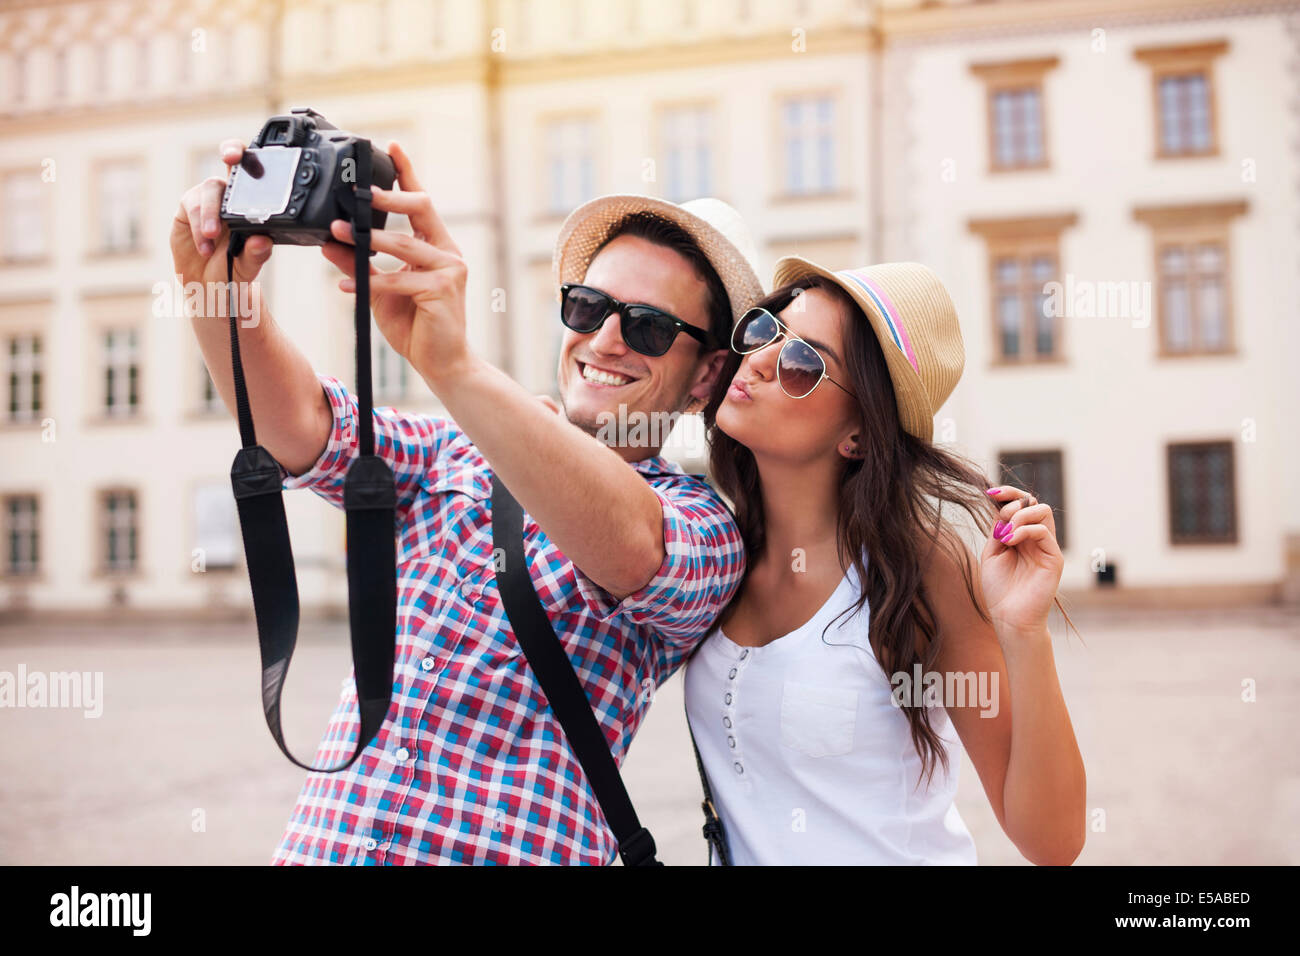 Happy tourists taking photo of themselves, Debica, Poland Stock Photo